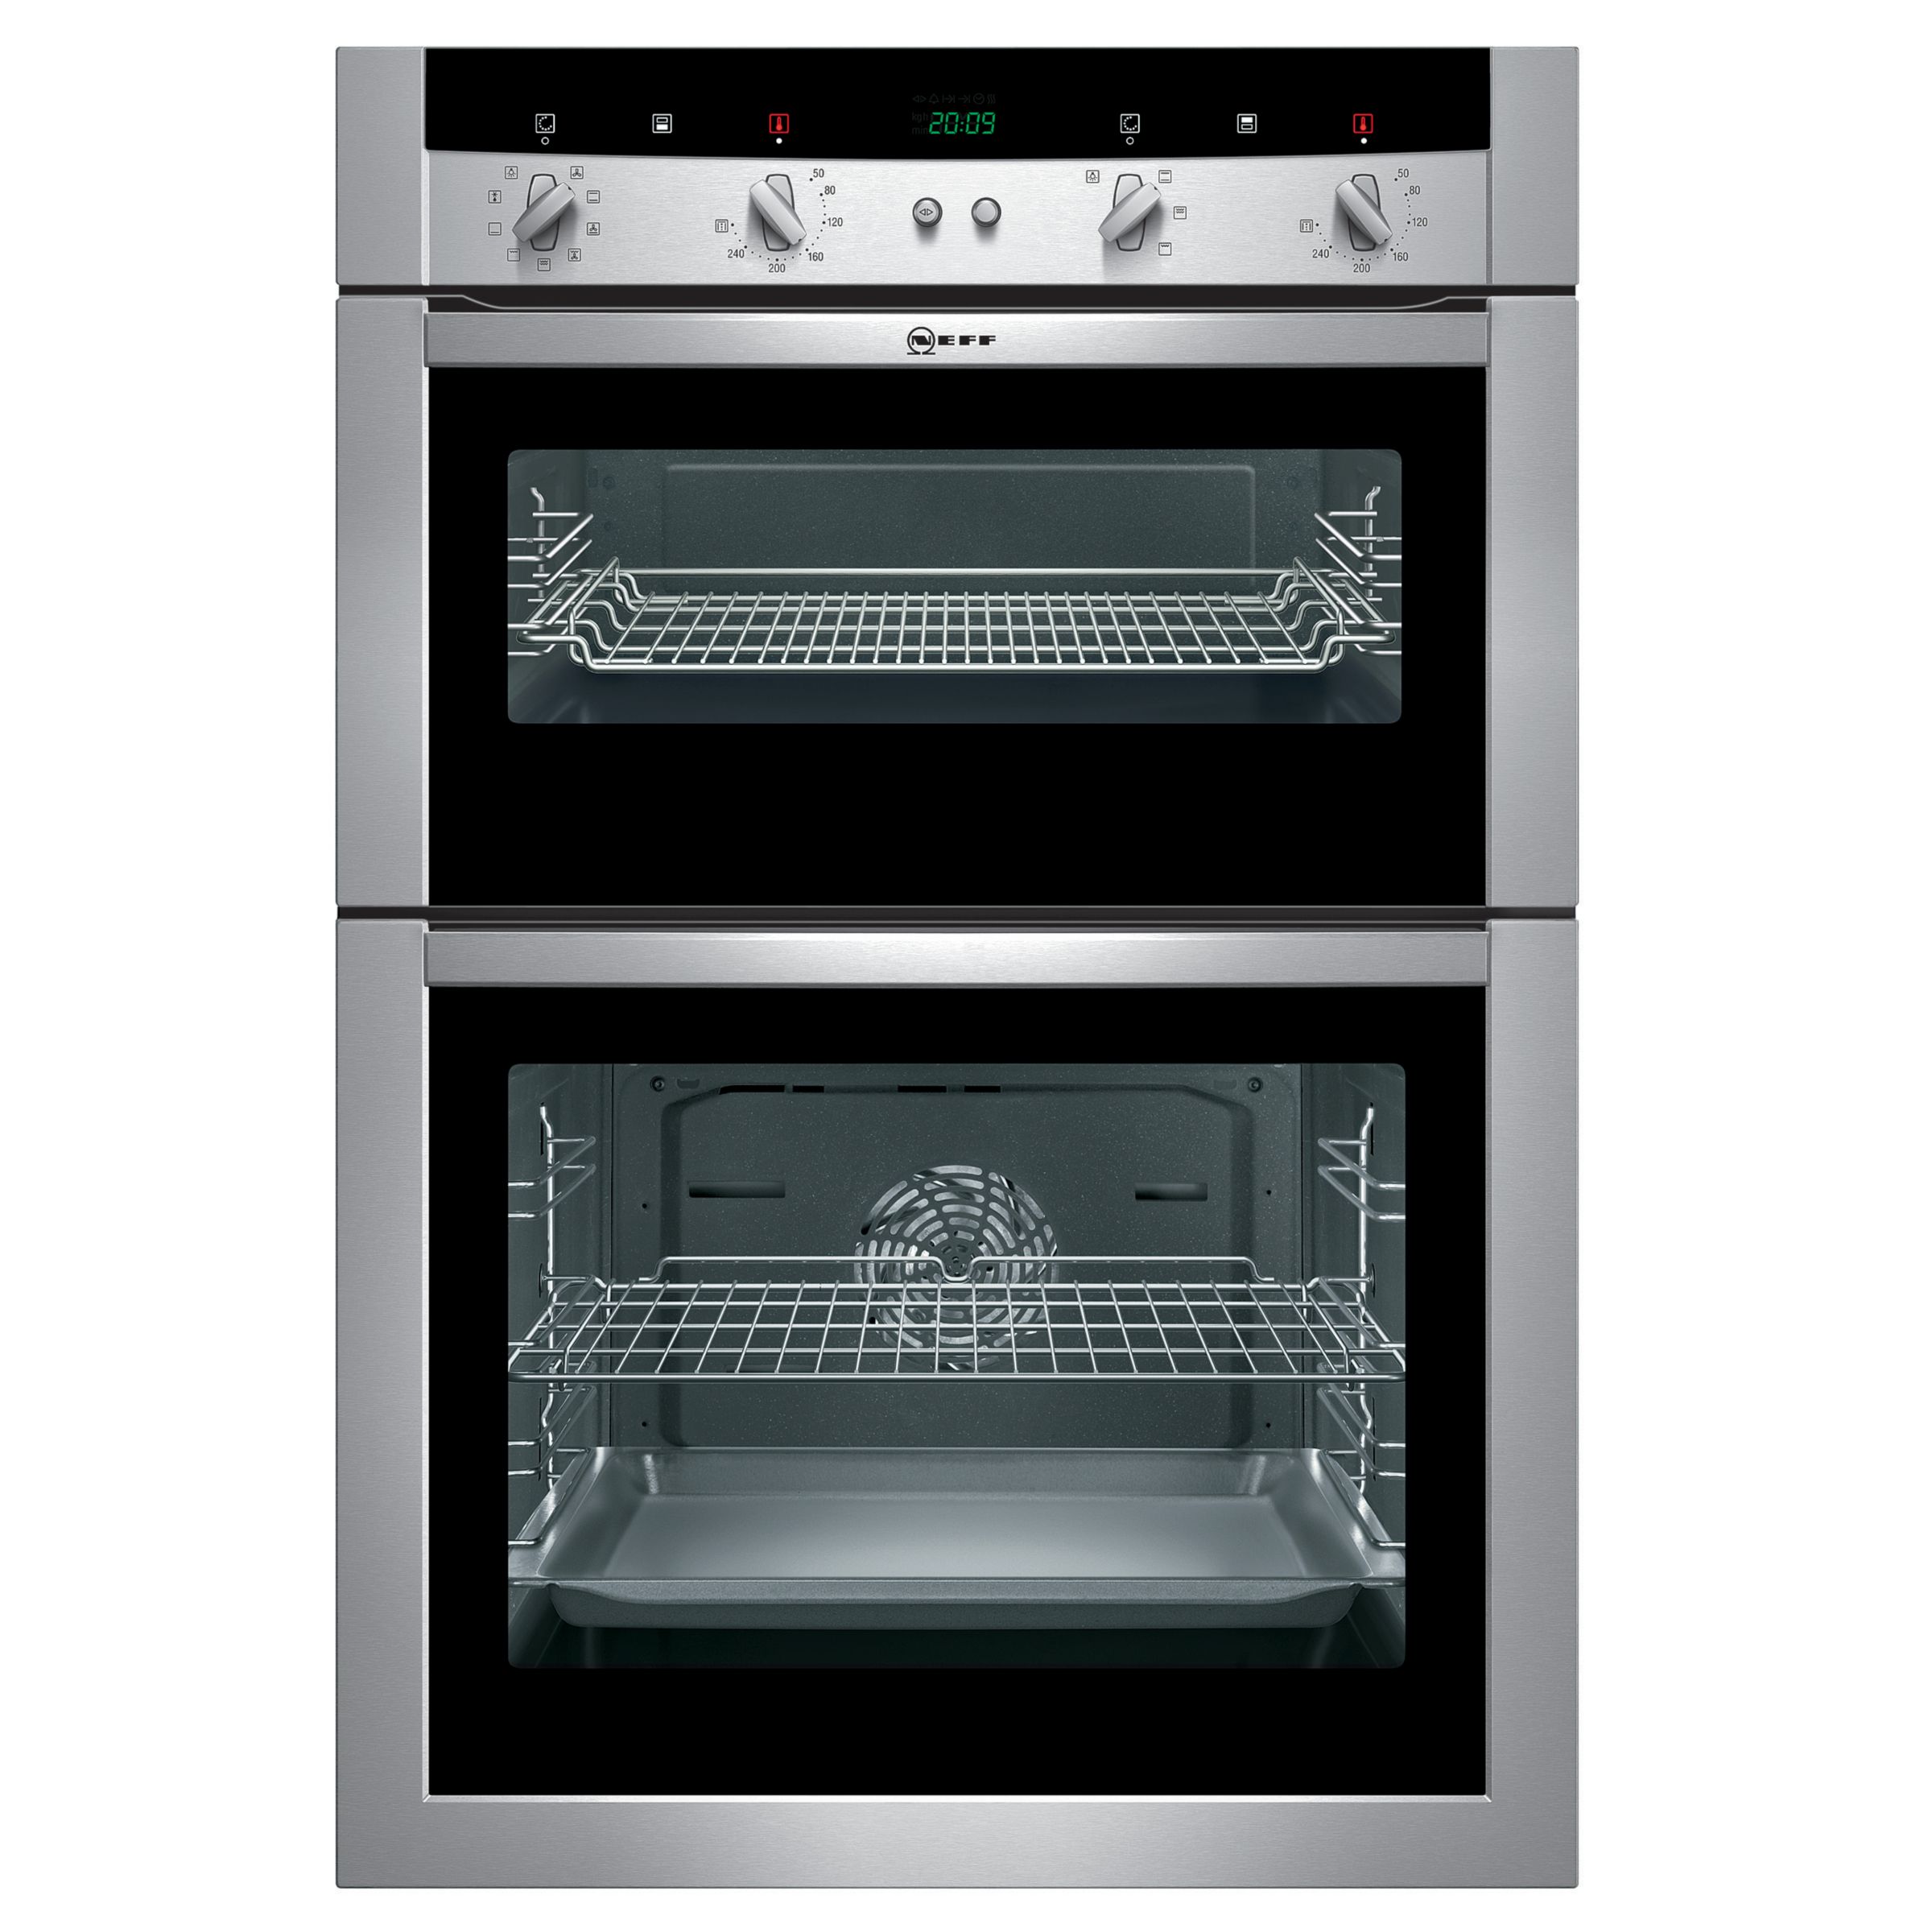 Neff U15M62N0GB Double Electric Oven, Stainless Steel at John Lewis